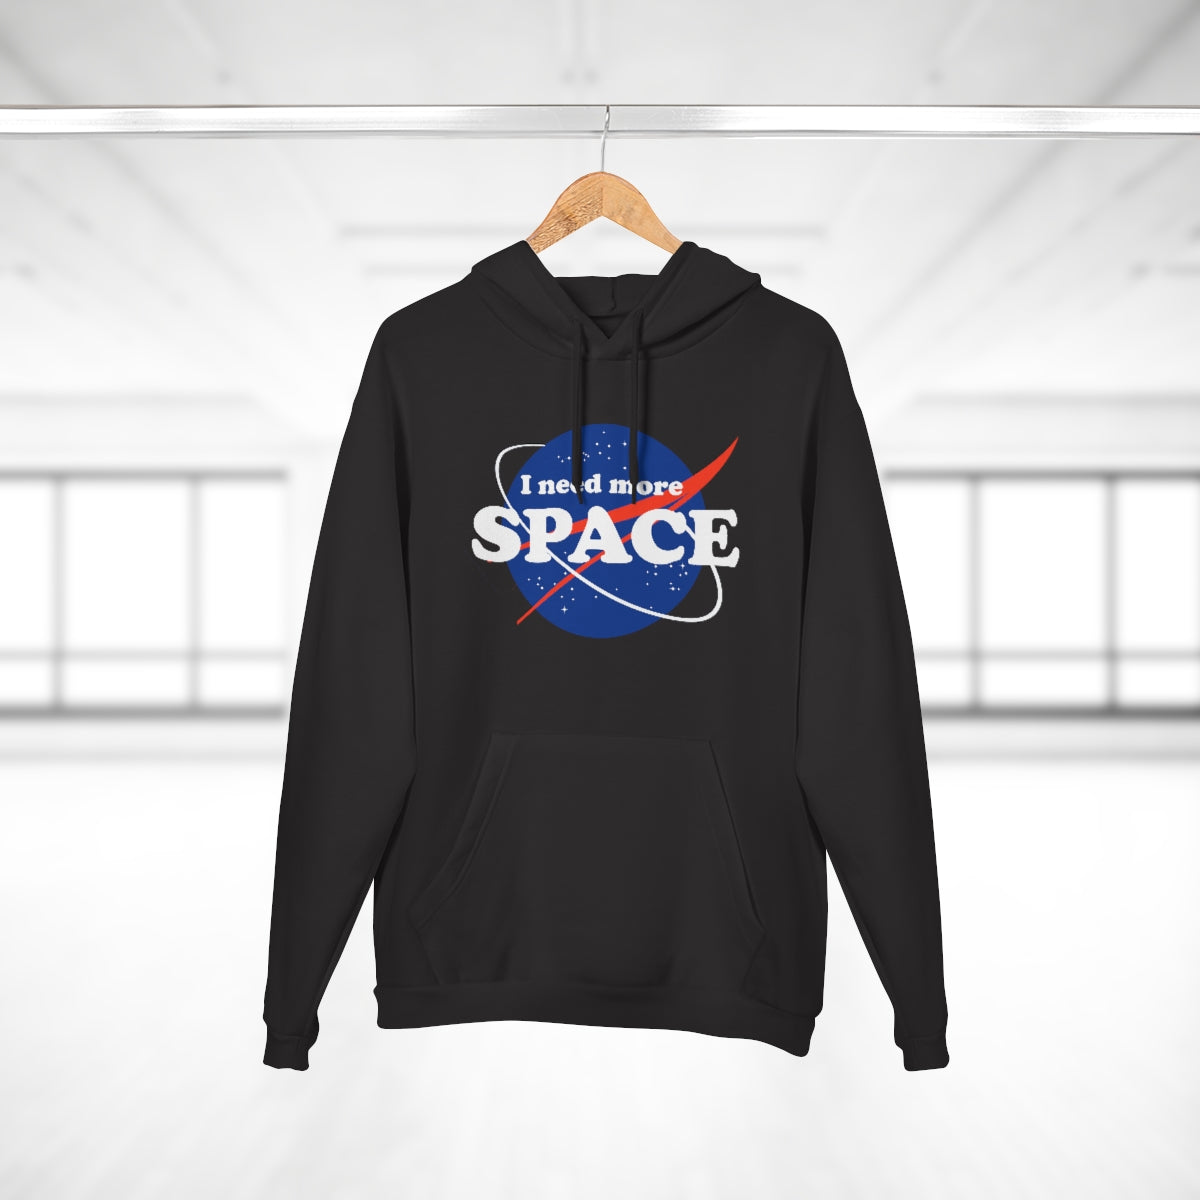 I Need Even More Space Unisex Hoodie